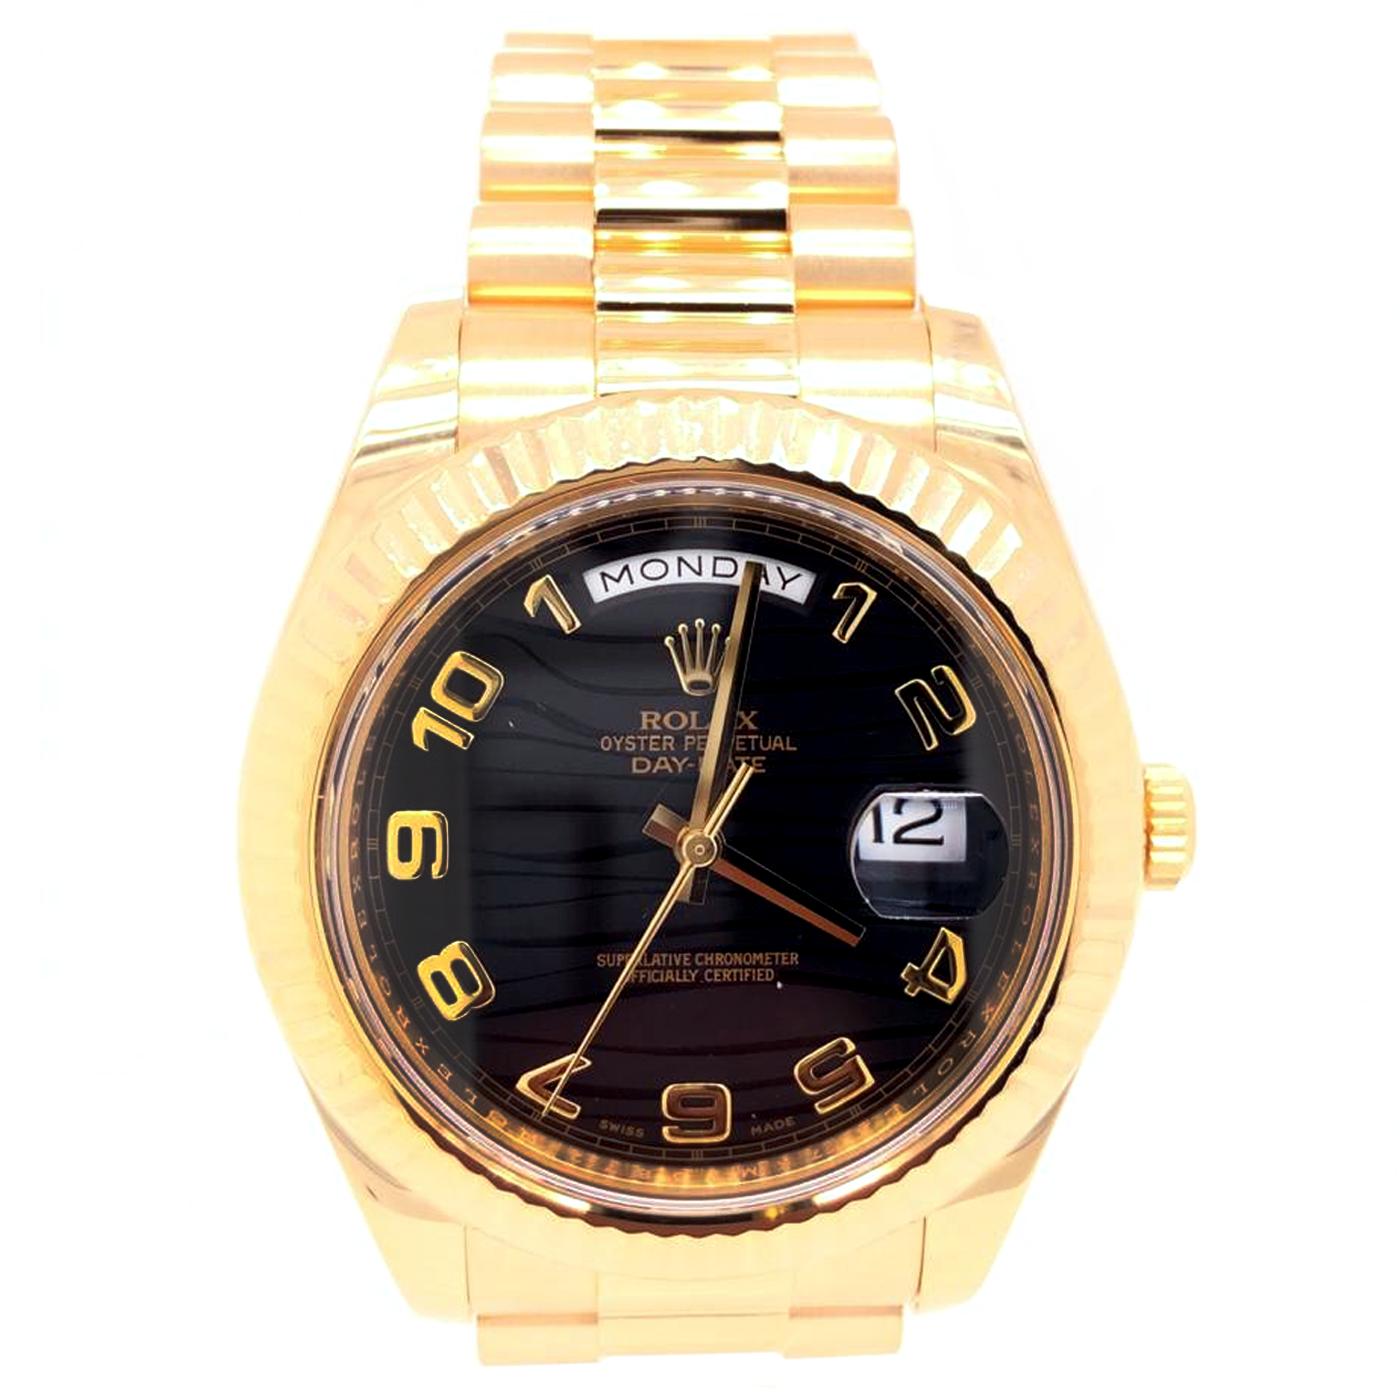 Rolex Oyster Perpetual Day-Date II Watches. The Rolex President. 218238 41mm 18K yellow gold case, fluted bezel, black wave dial, Arabic numerals, and President Bracelet. This is the New Model Rolex Presidential “The Day-Date II”.This Model features